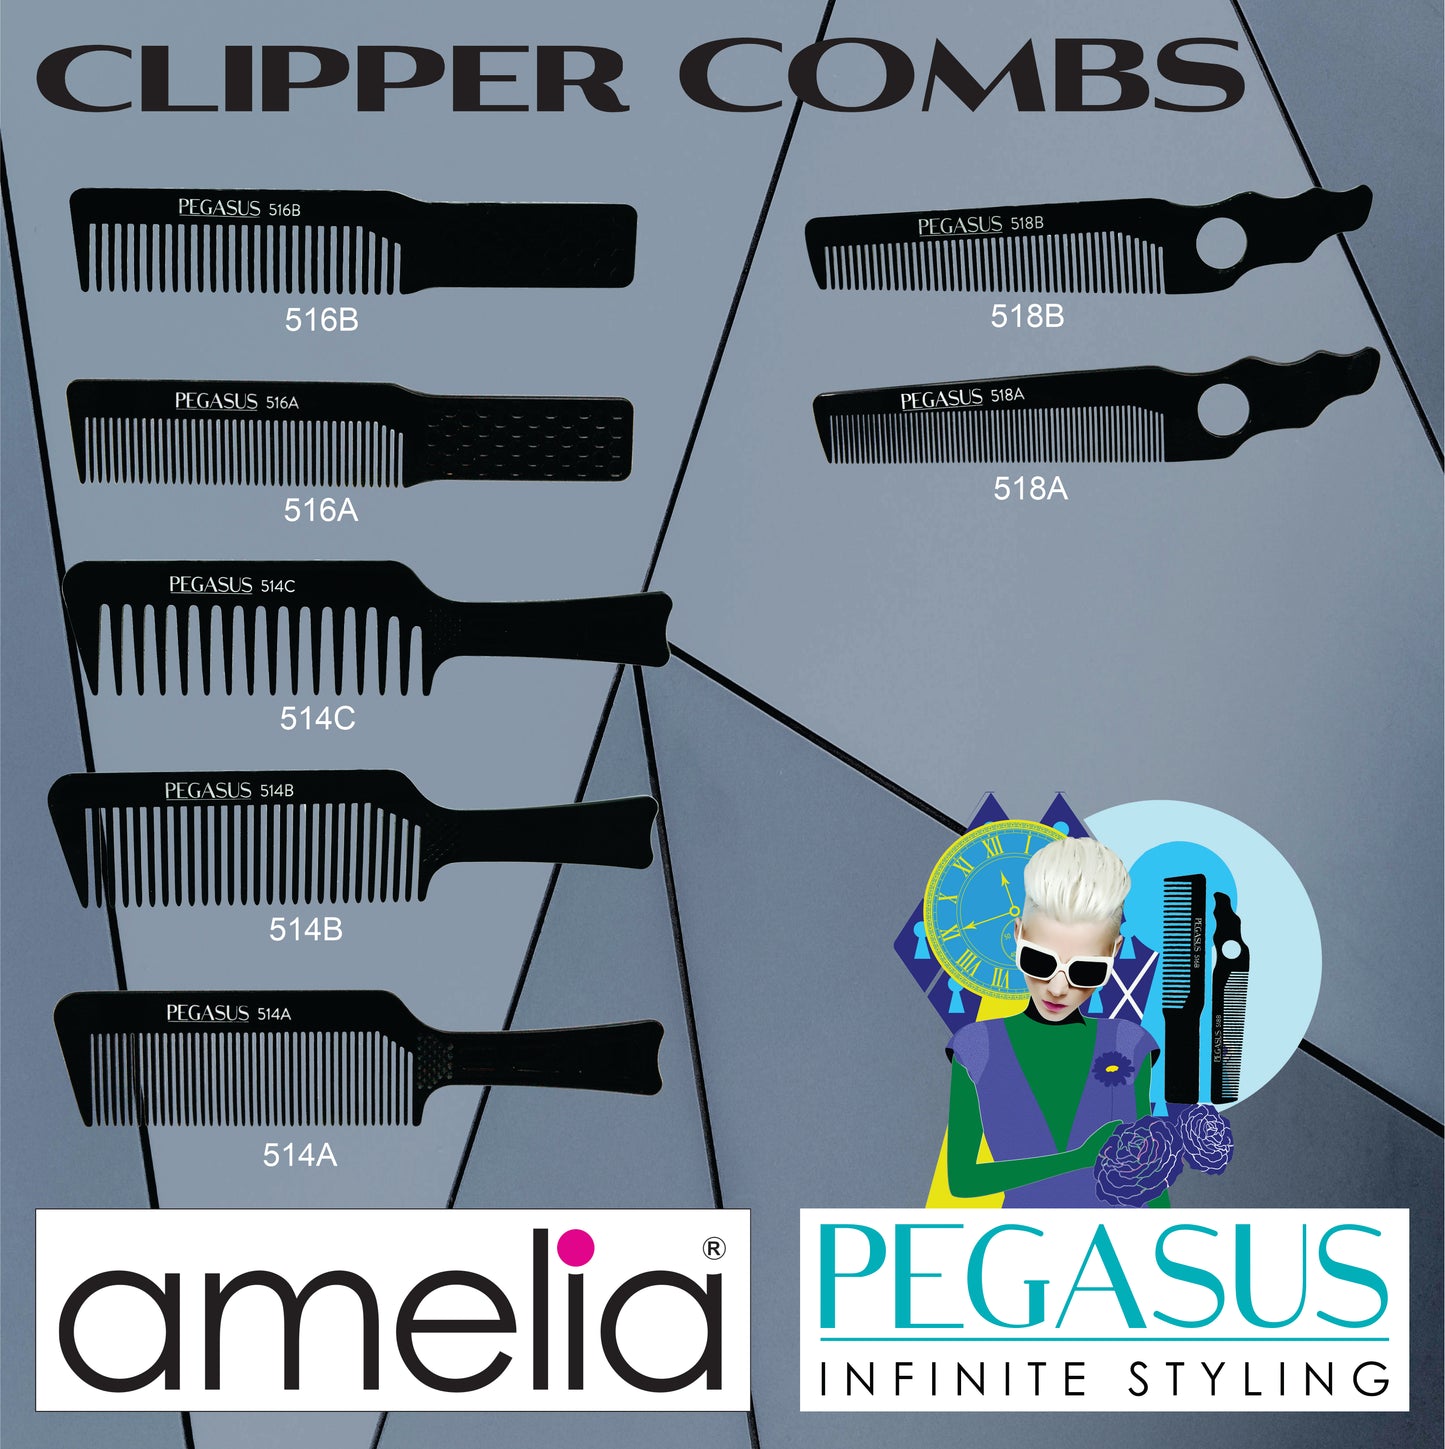 Pegasus 516A, 8in Hard Rubber Fine Tooth Klipper Comb, Handmade, Seamless, Smooth Edges, Anti Static, Heat and Chemically Resistant Comb | Peines de goma dura - Black